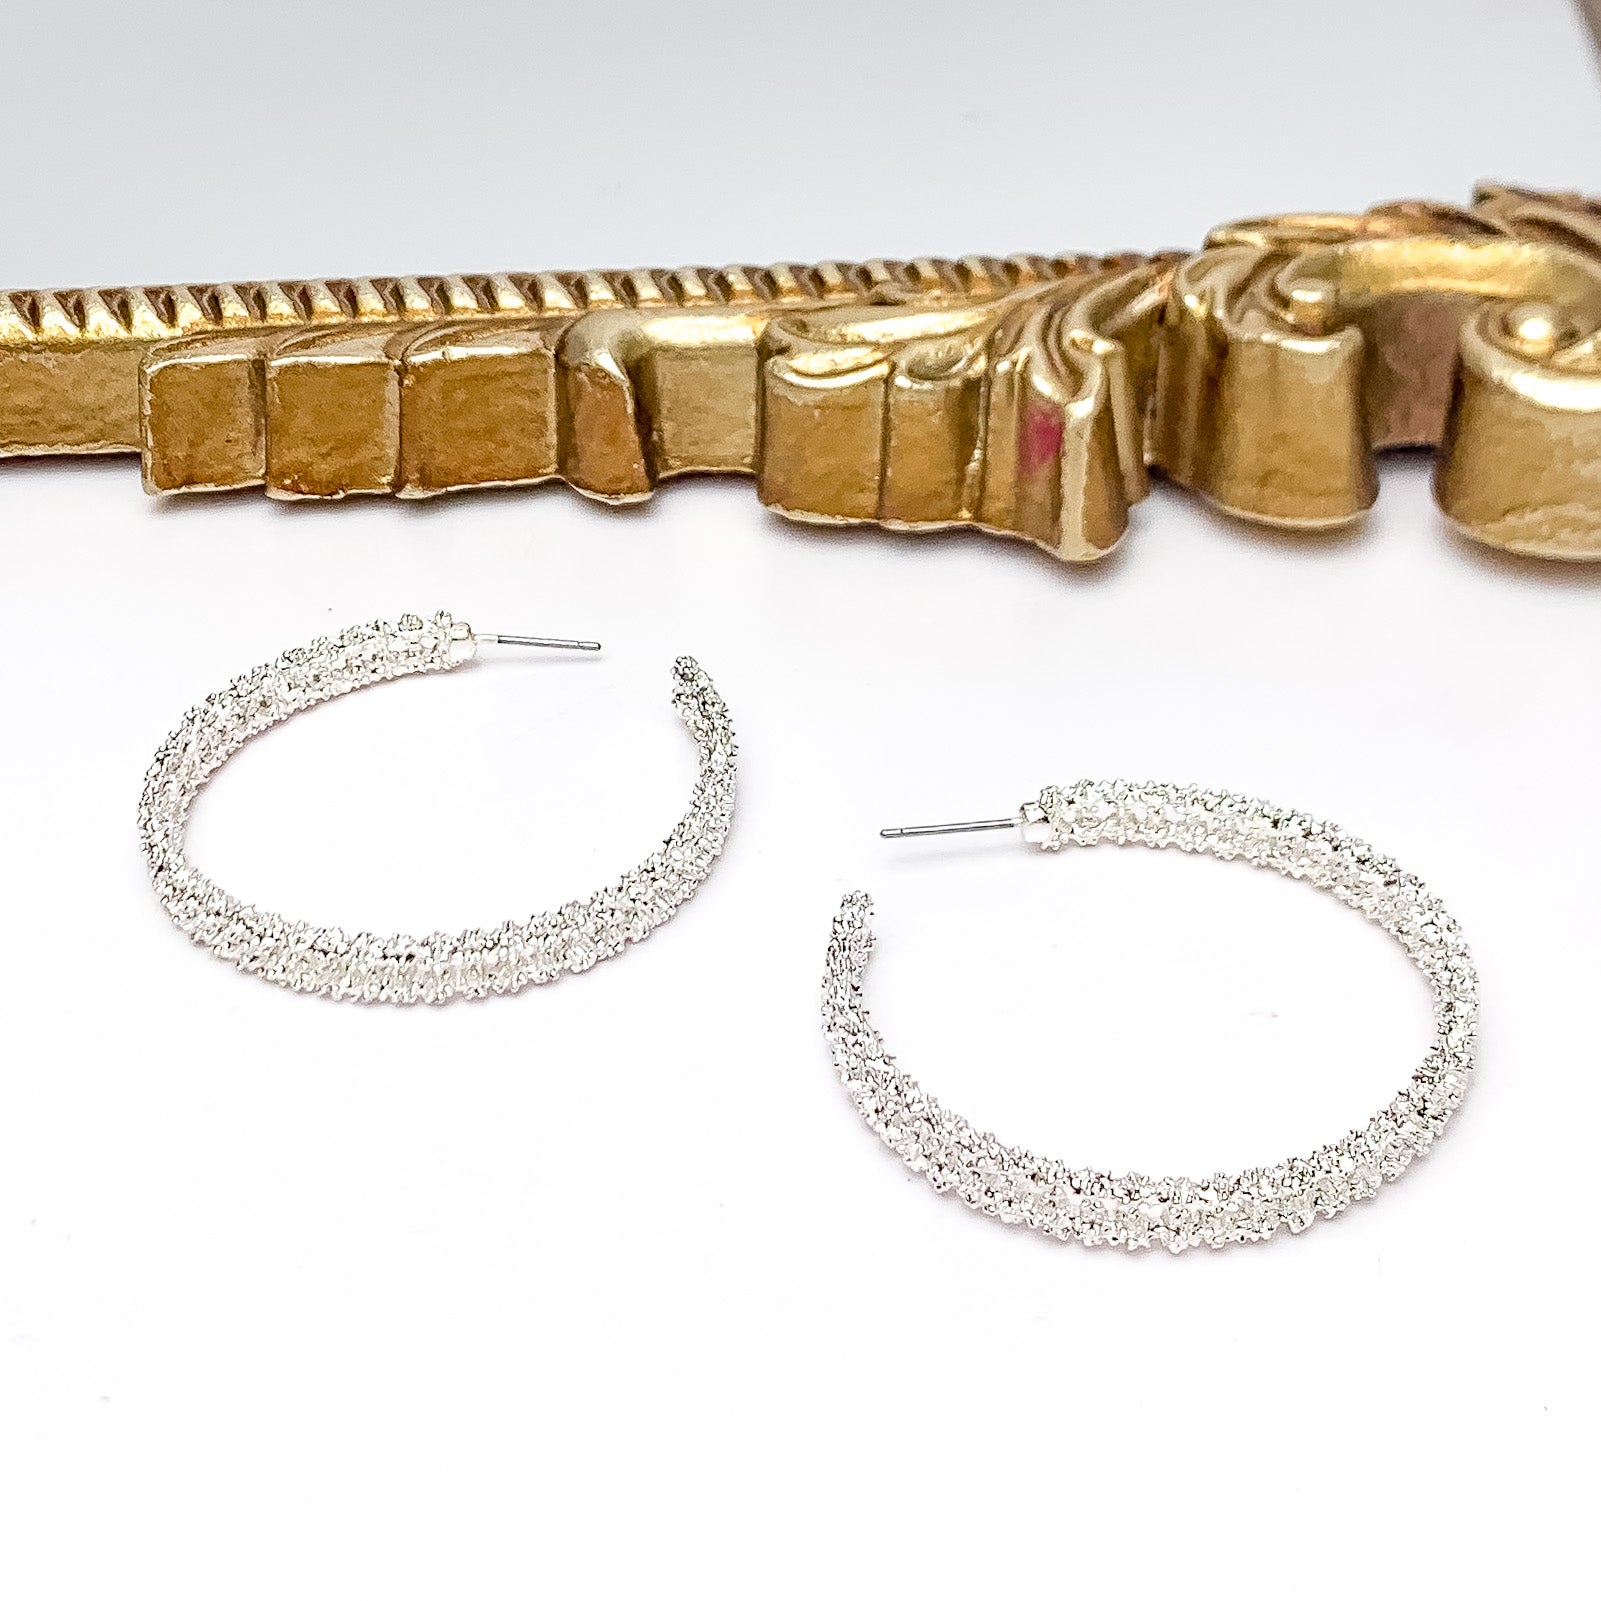 Worry Free Large Silver Tone Textured Hoop Earrings. Pictured on a white background with a gold frame above the earrings.